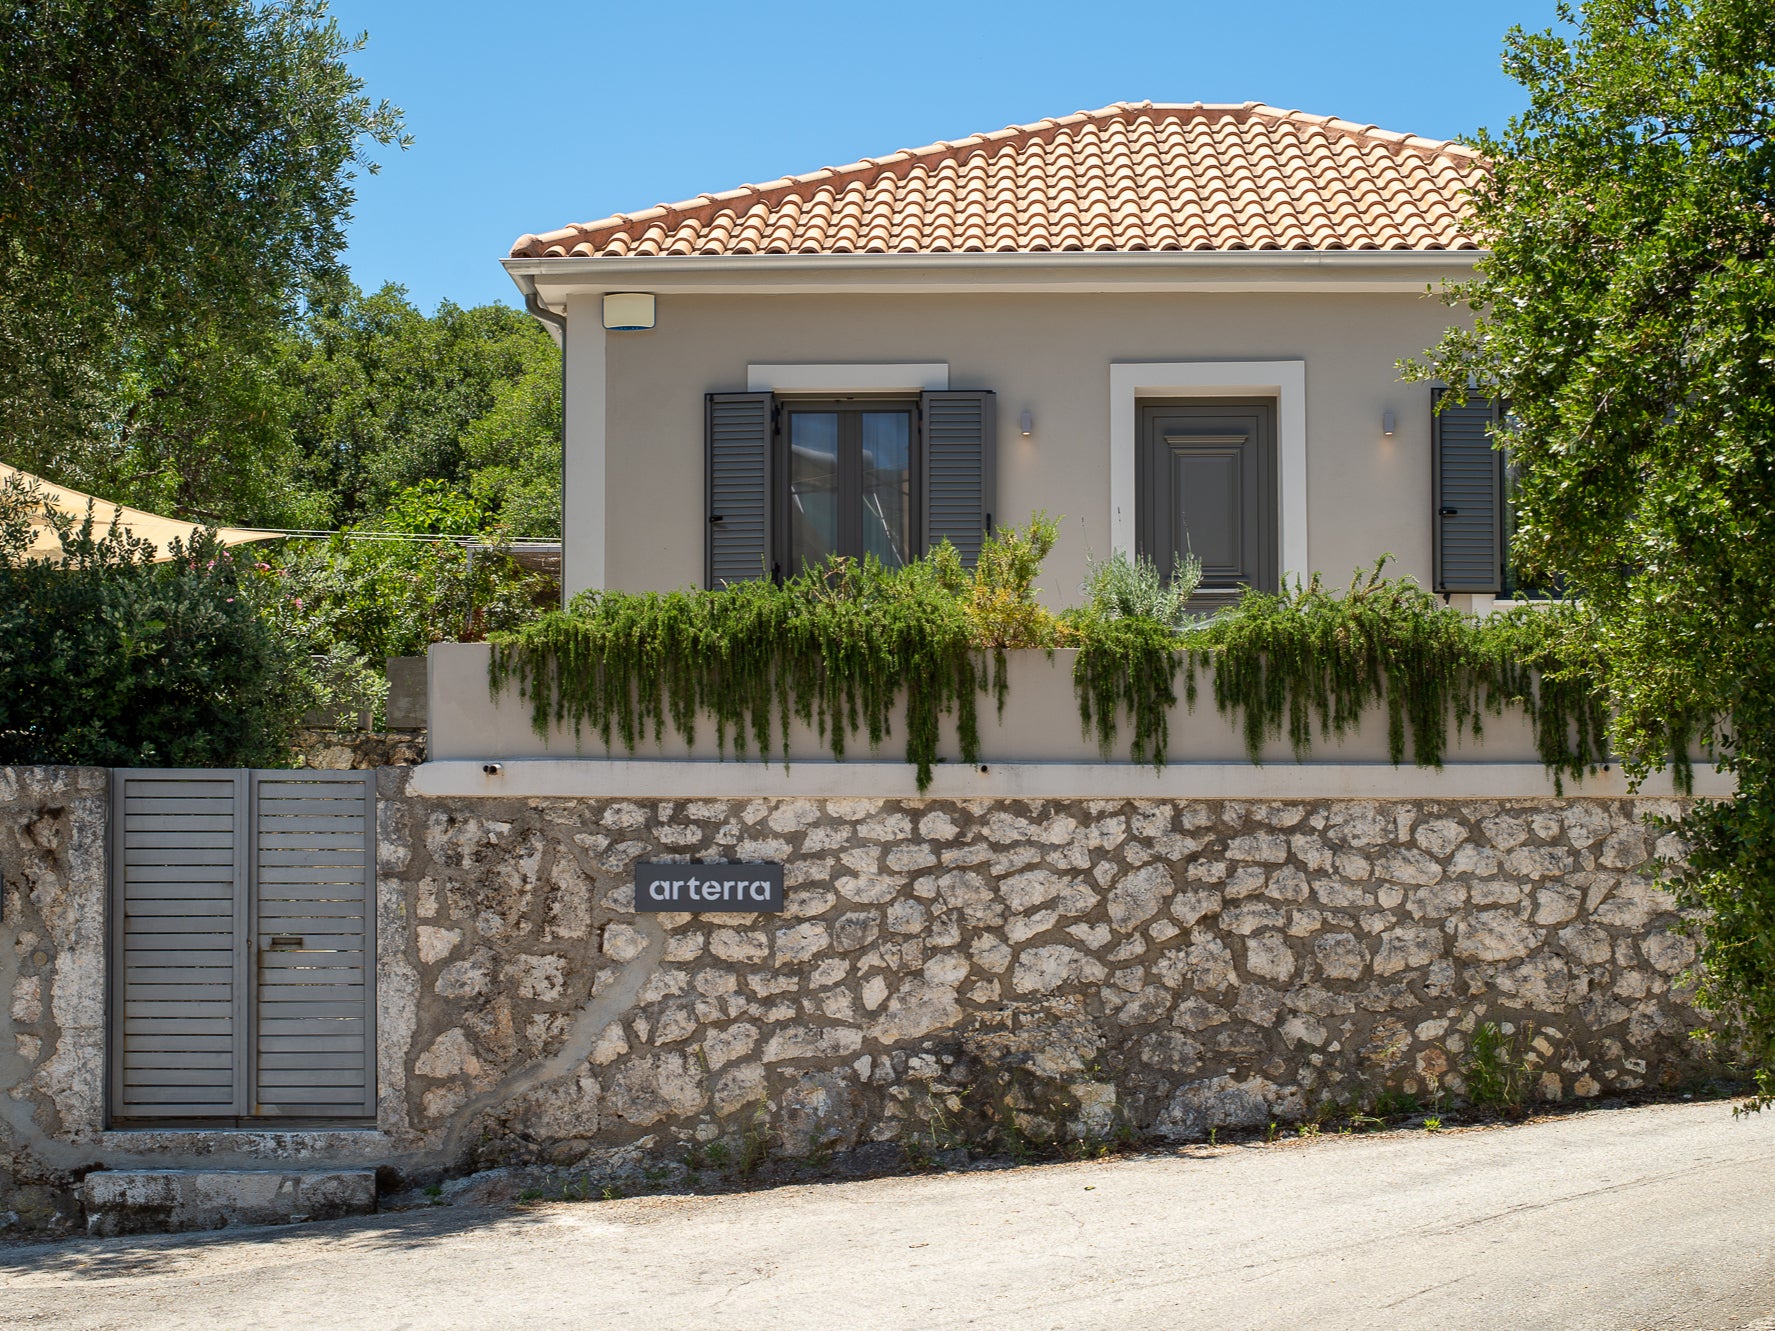 Villa Arterra, one of the new batch of luxe-leaning places to stay in Kefalonia